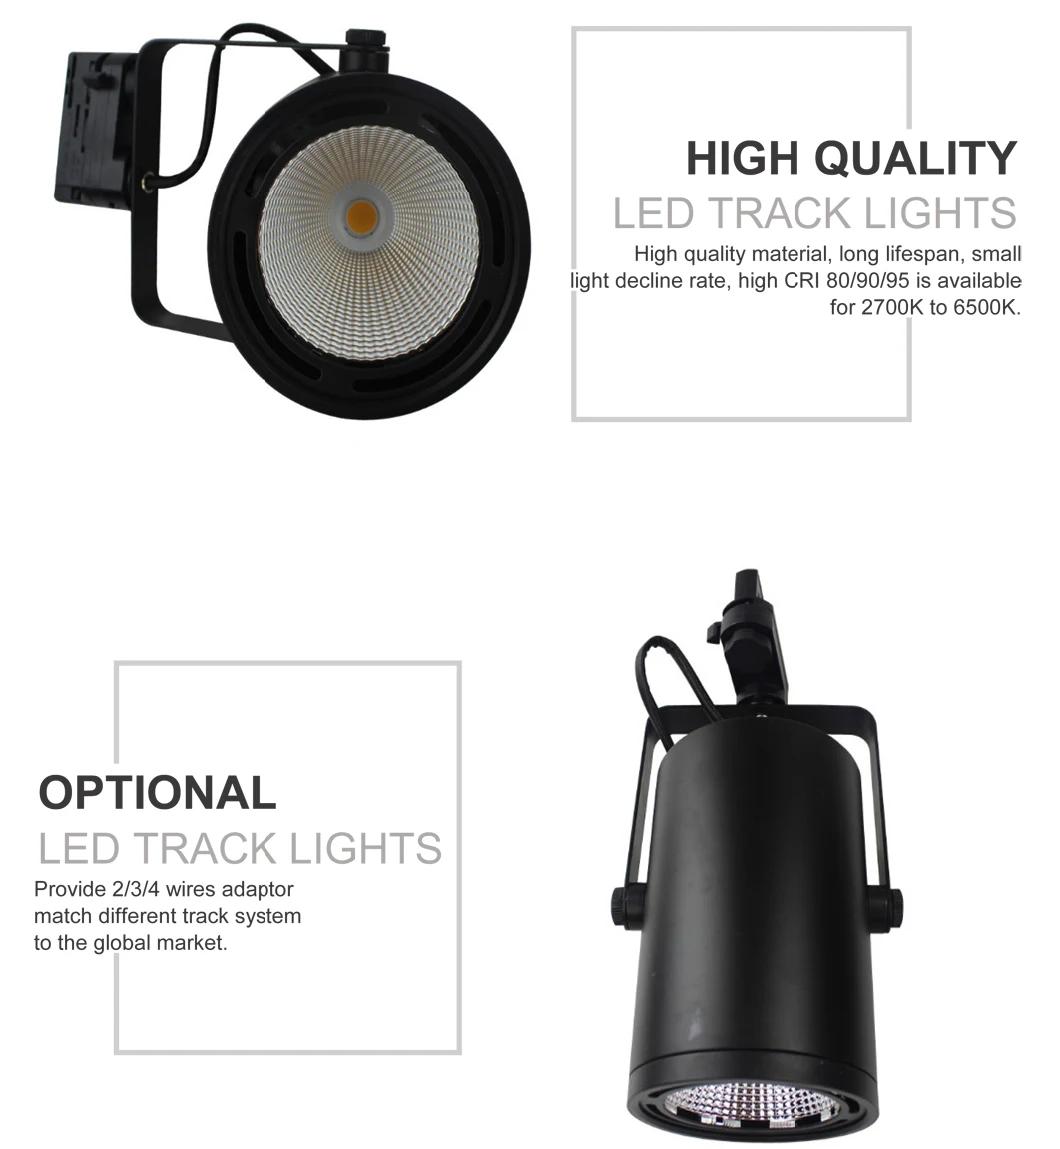 OEM ODM Factory Hot Selling Exquisite 5 Years Warranty Adjustable 15W 30W 40W LED Track Light